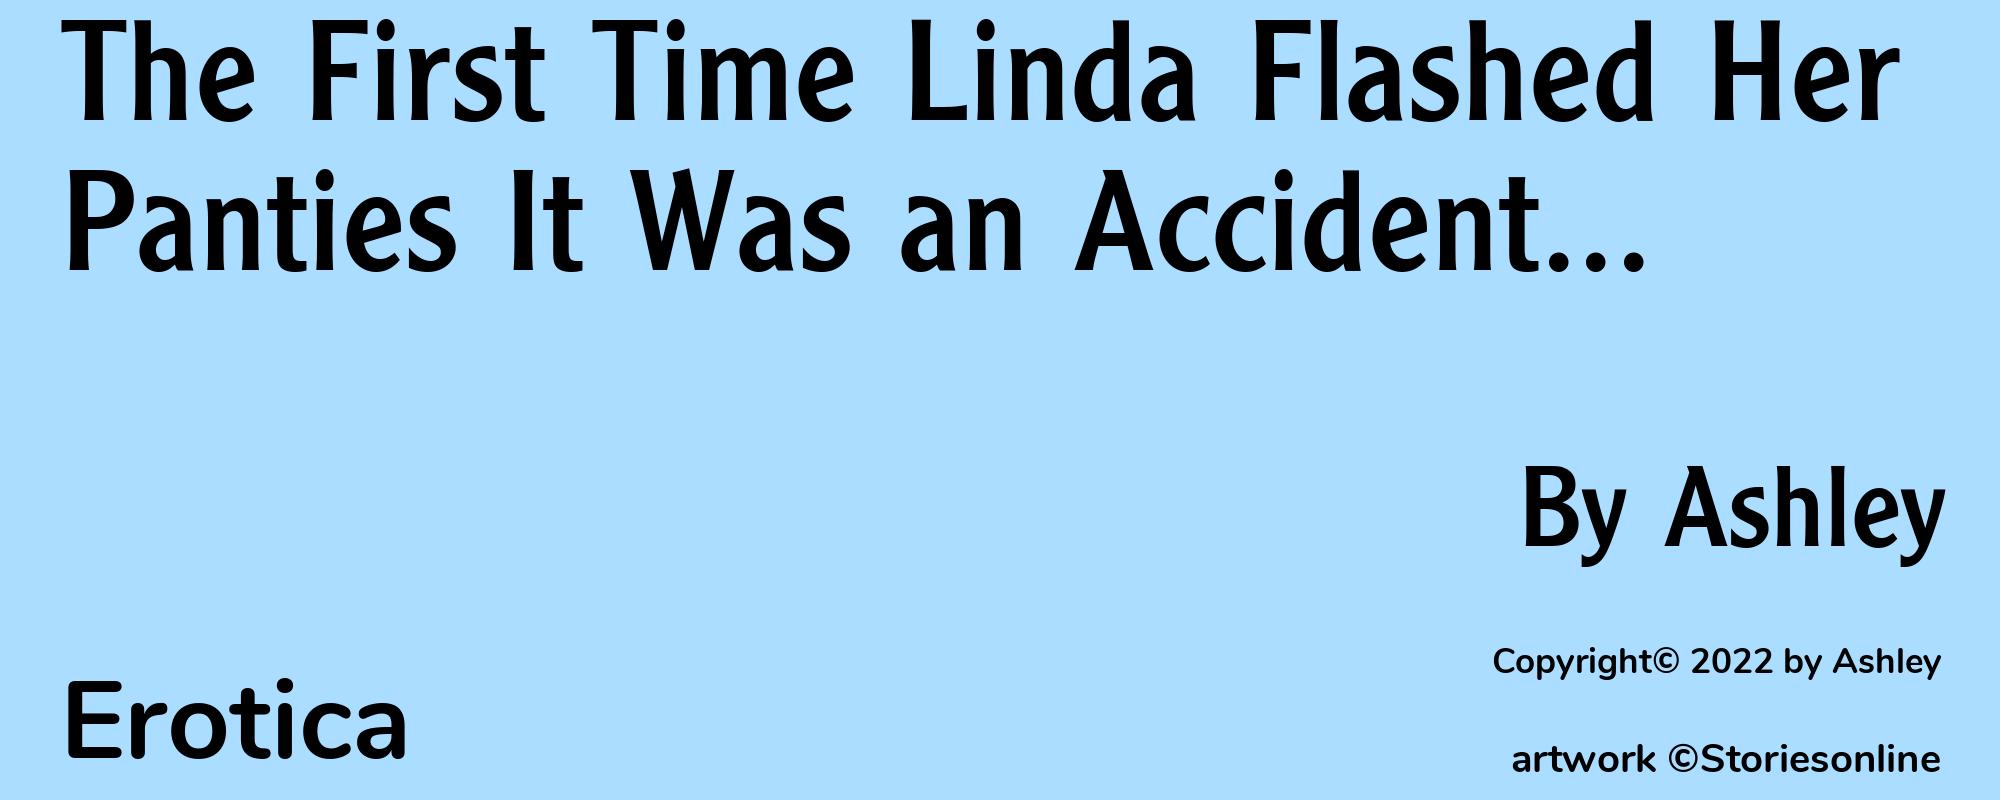 The First Time Linda Flashed Her Panties It Was an Accident... - Cover